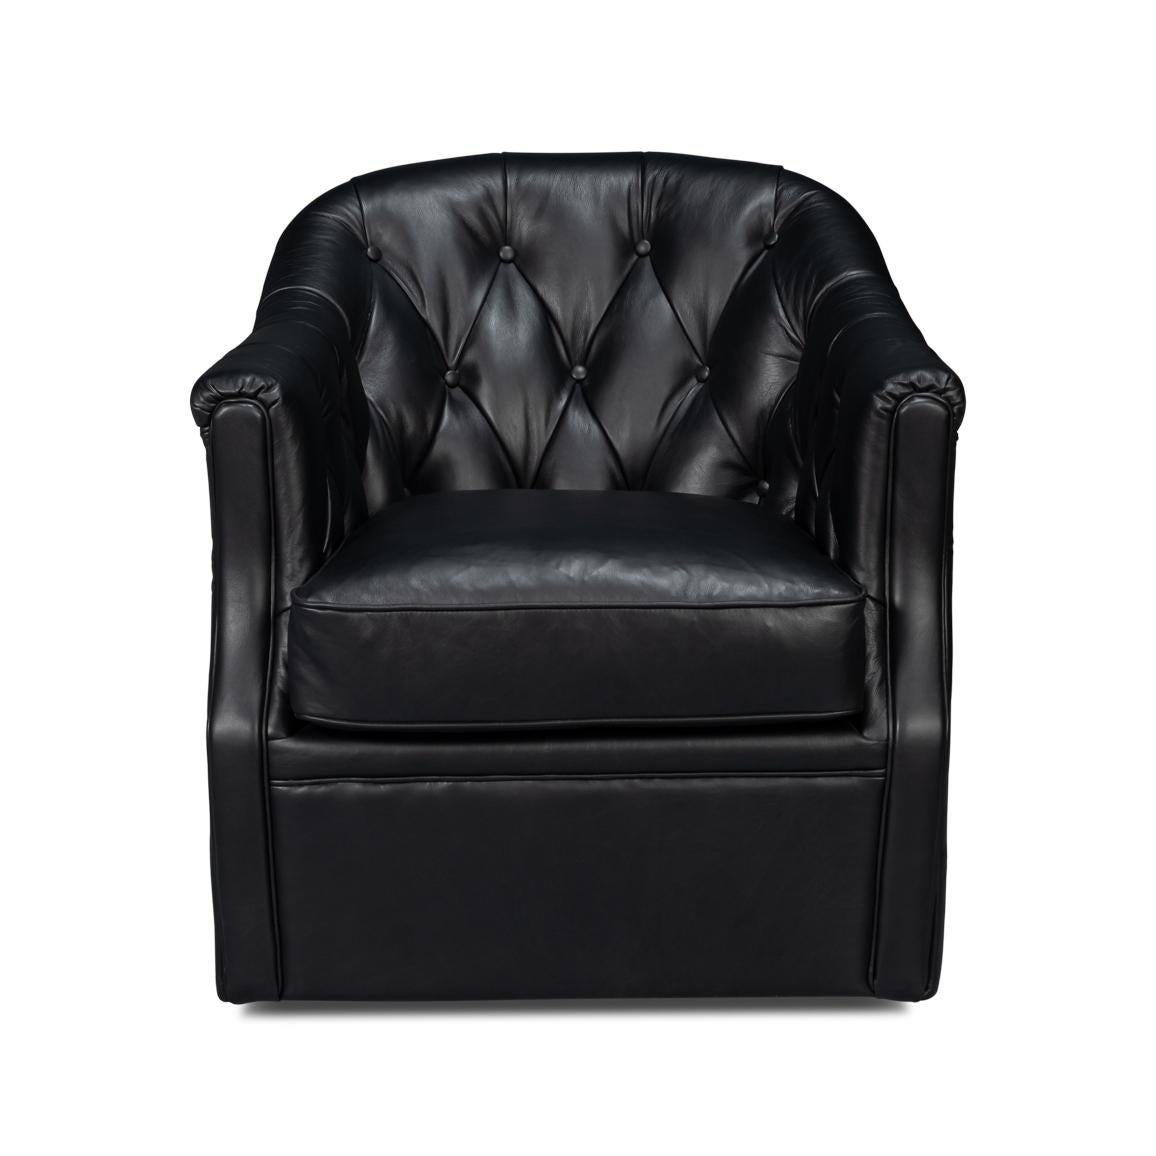 A classic leather upholstered tub back armchair. In our Onyx black leather with button tufted backrest and a cushioned seat, raised on a swivel base.
Dimensions: 30